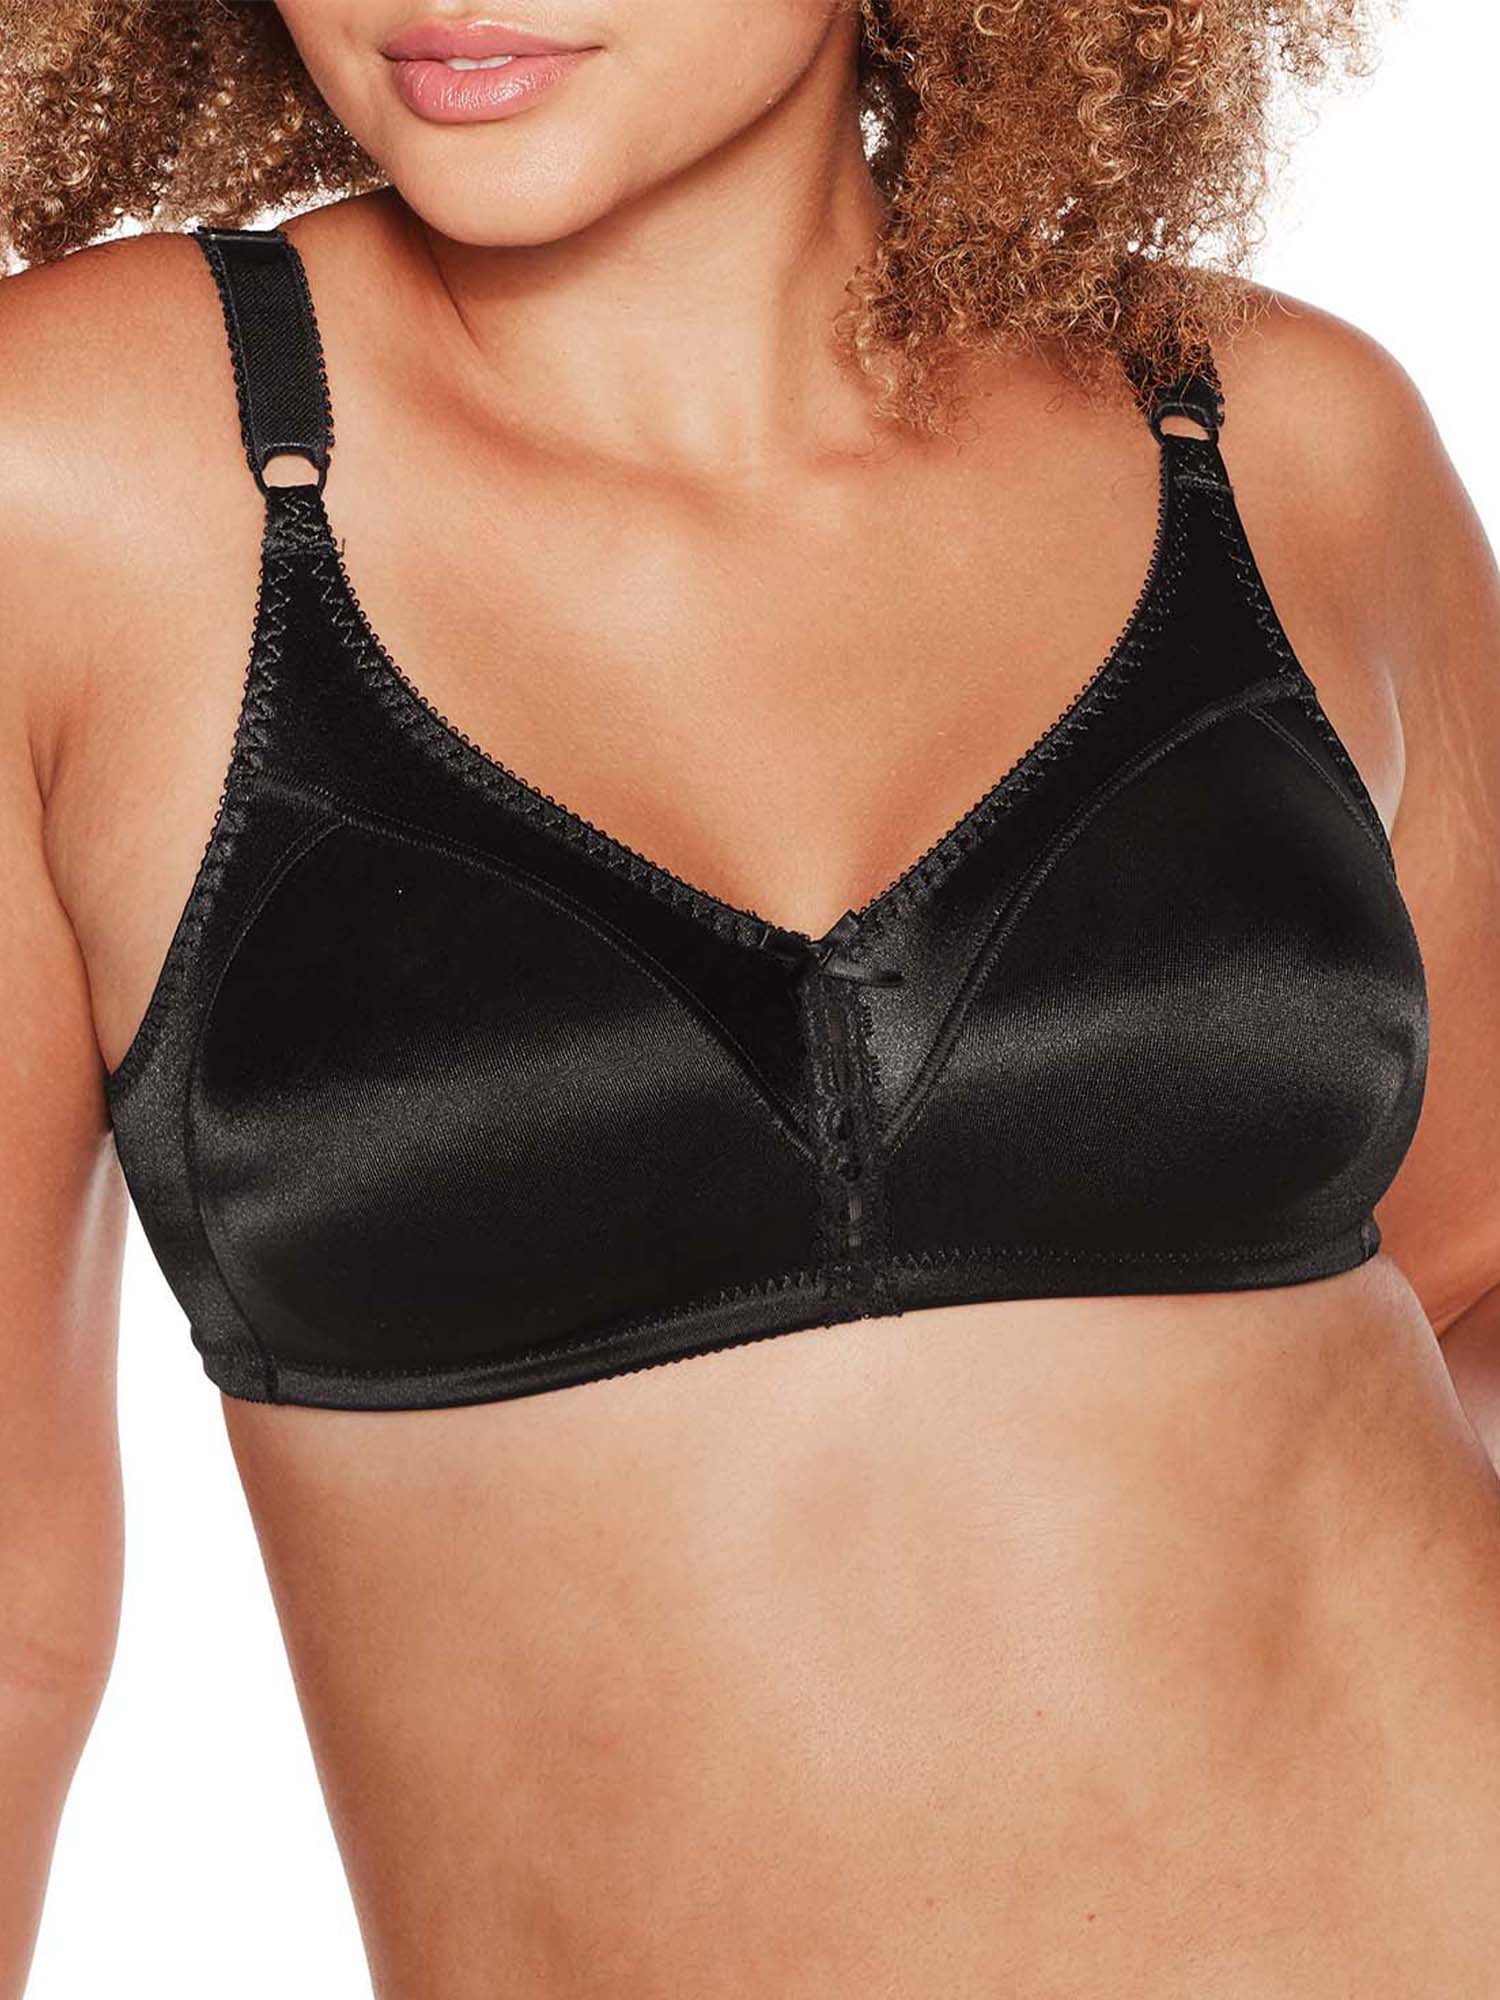 The Bra Box on Instagram: All day smoothing comfort with double support  Bali Wirefree Bra Box Set. Sizes: 34DD, 36D, 36DD, 38D, 40D,42D Price:  $495.00 TTD and includes two bras and free